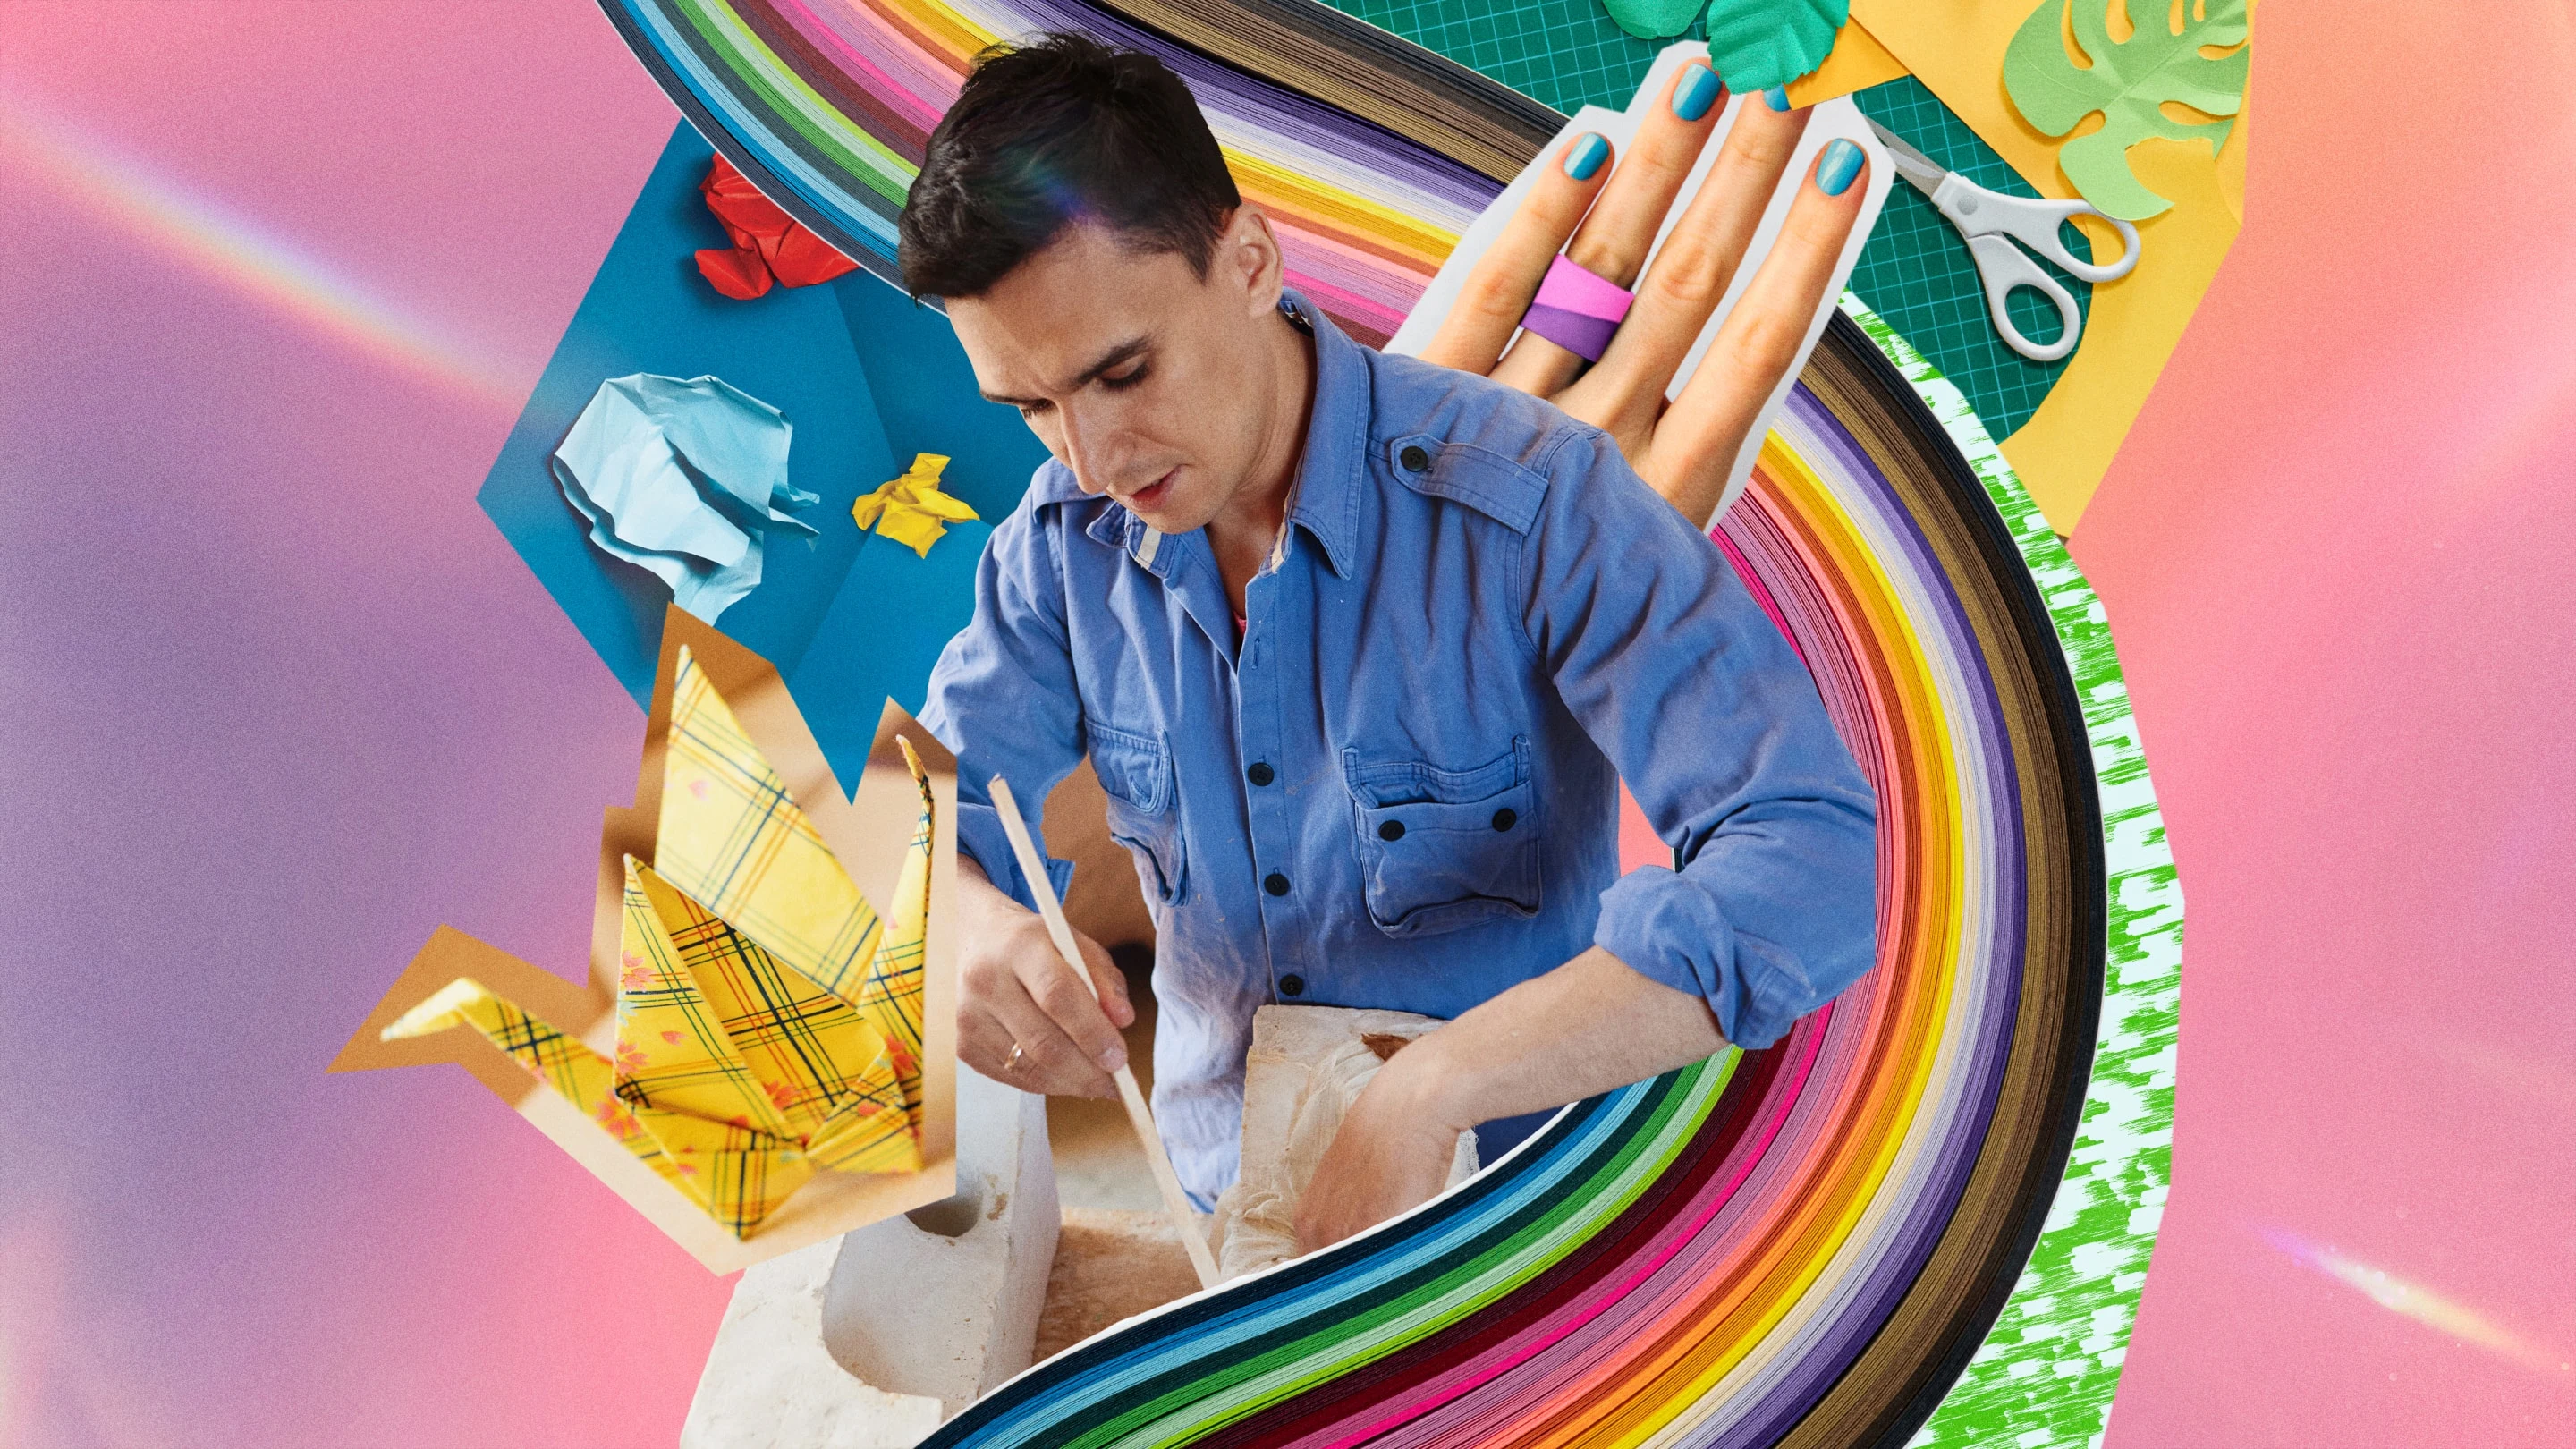 Collage featuring a crafty White man surrounded by a rainbow of colorful paper, crafting scissors, a hand modeling a paper ring and pieces of origami.